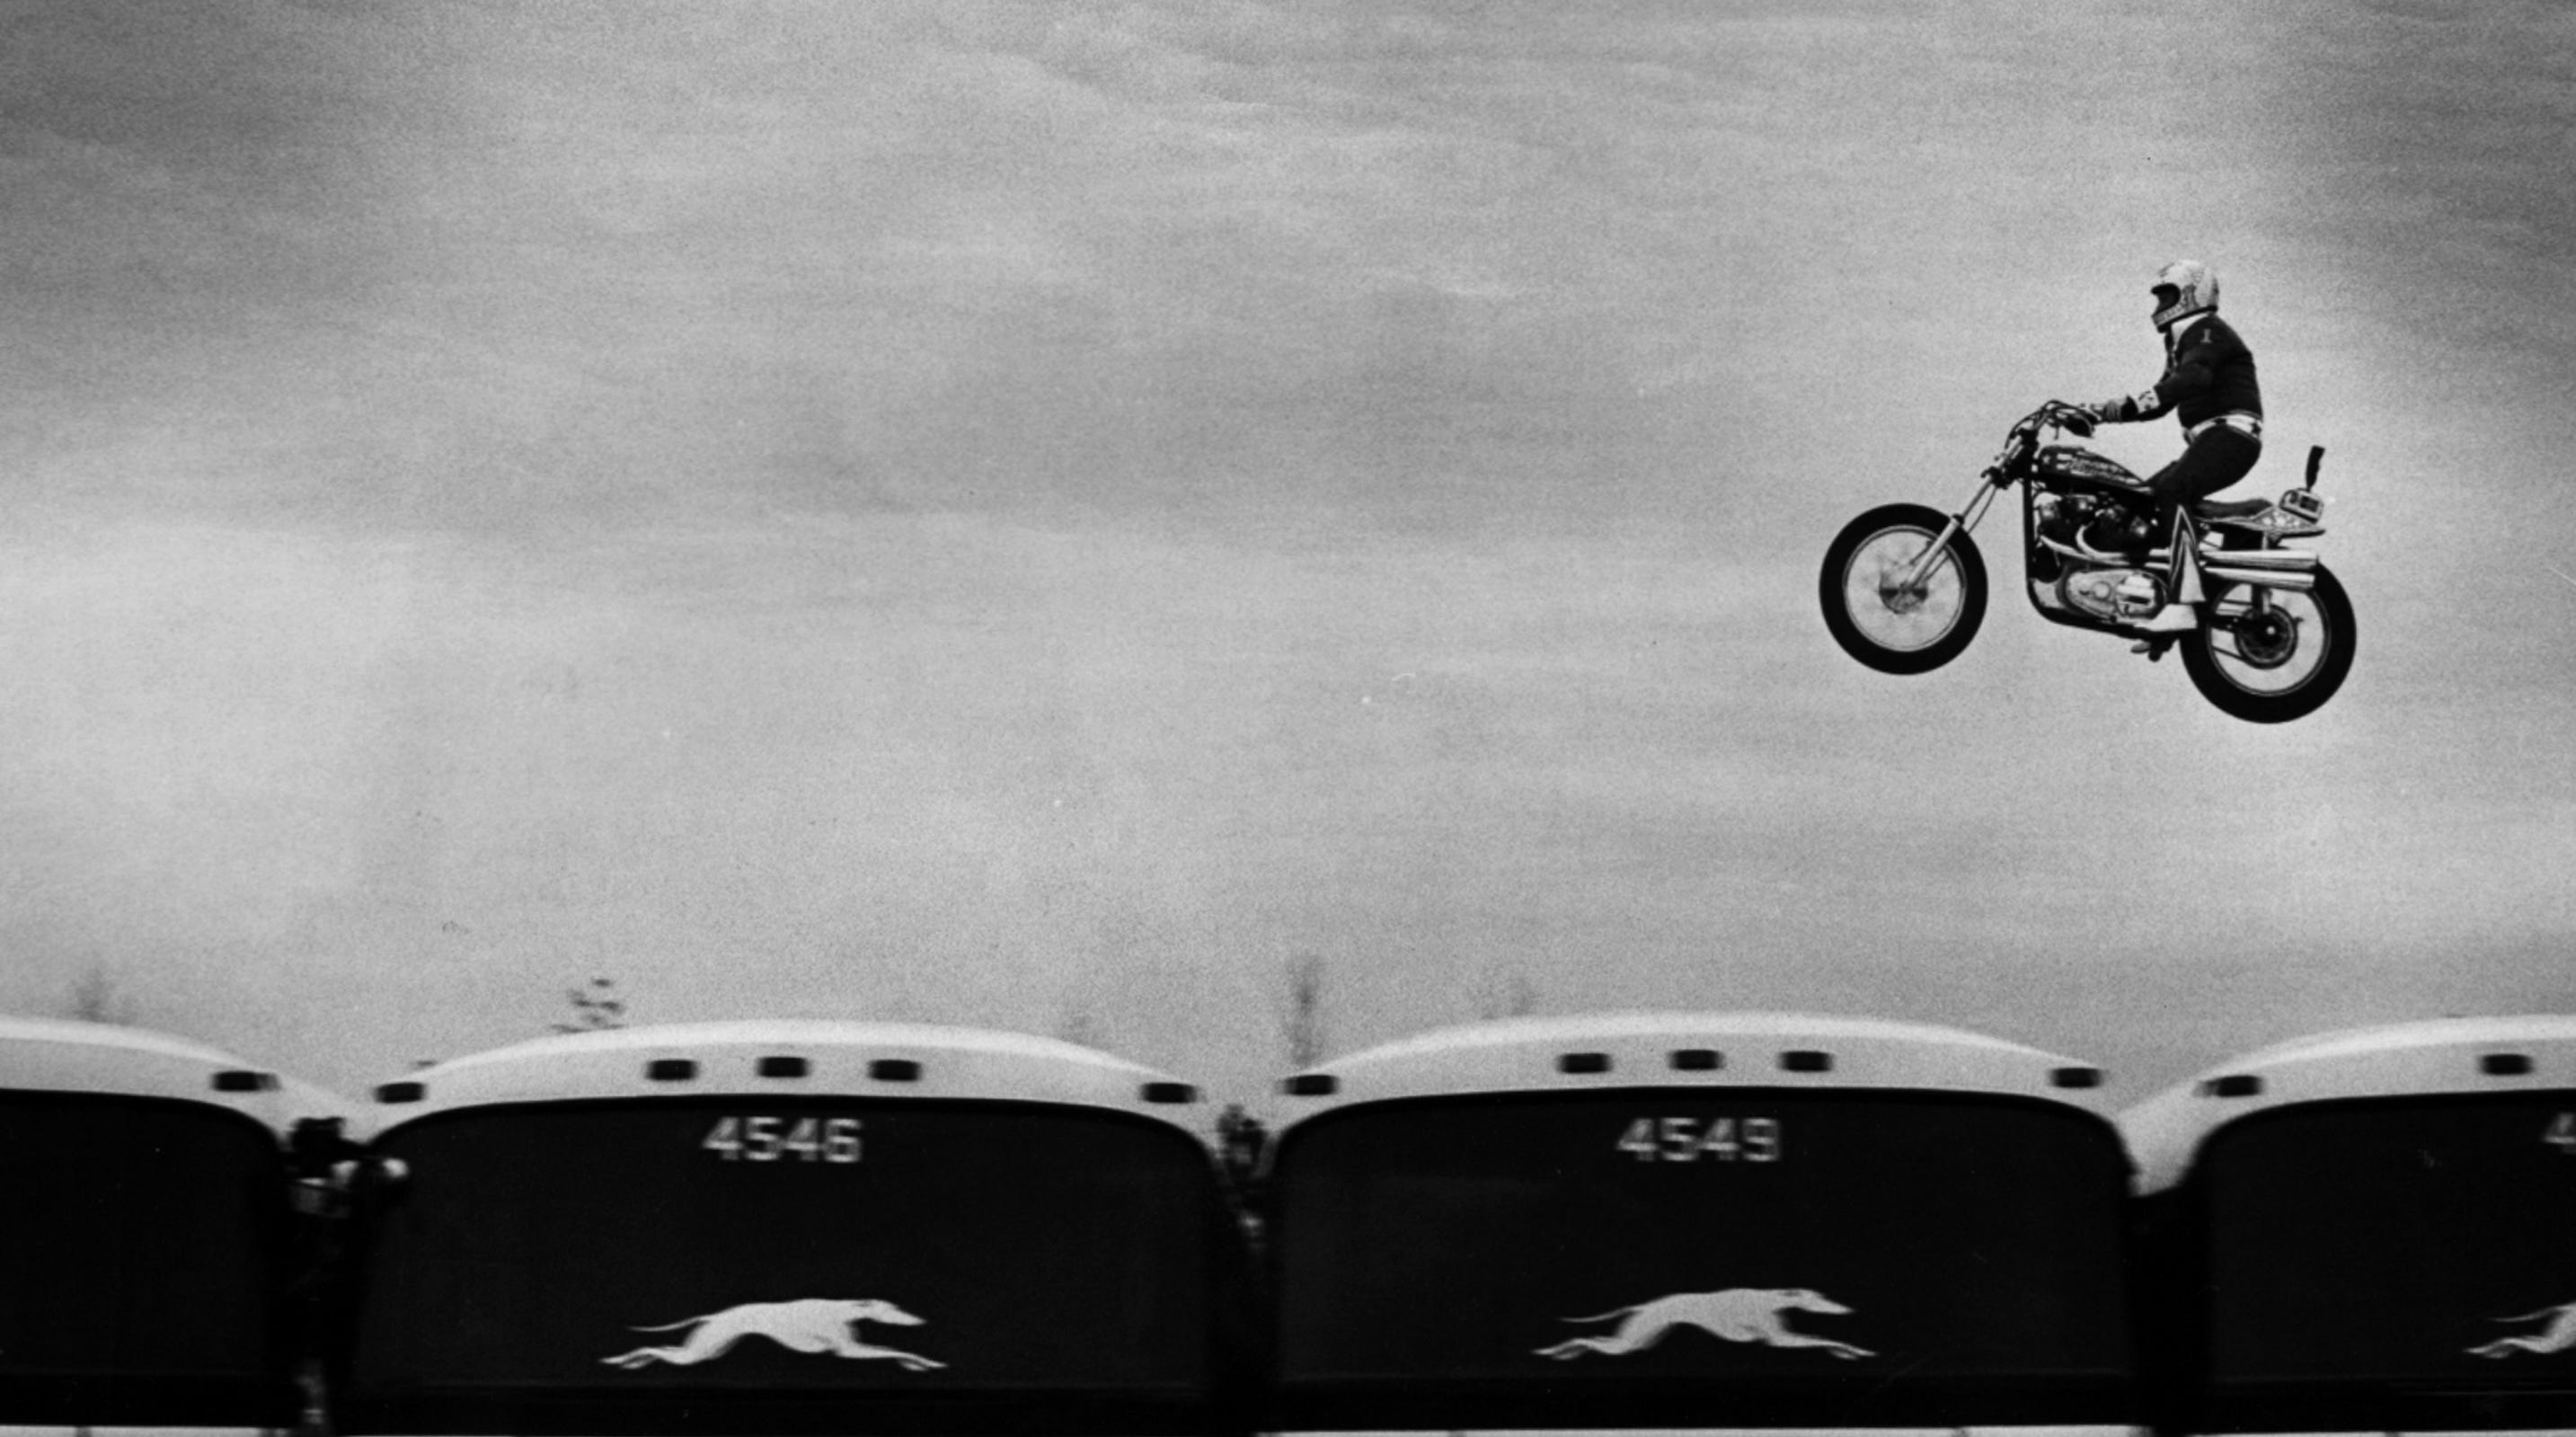 Today in History, October 25, 1975: Evel Knievel jumped 14 Greyhound buses at Kings Island